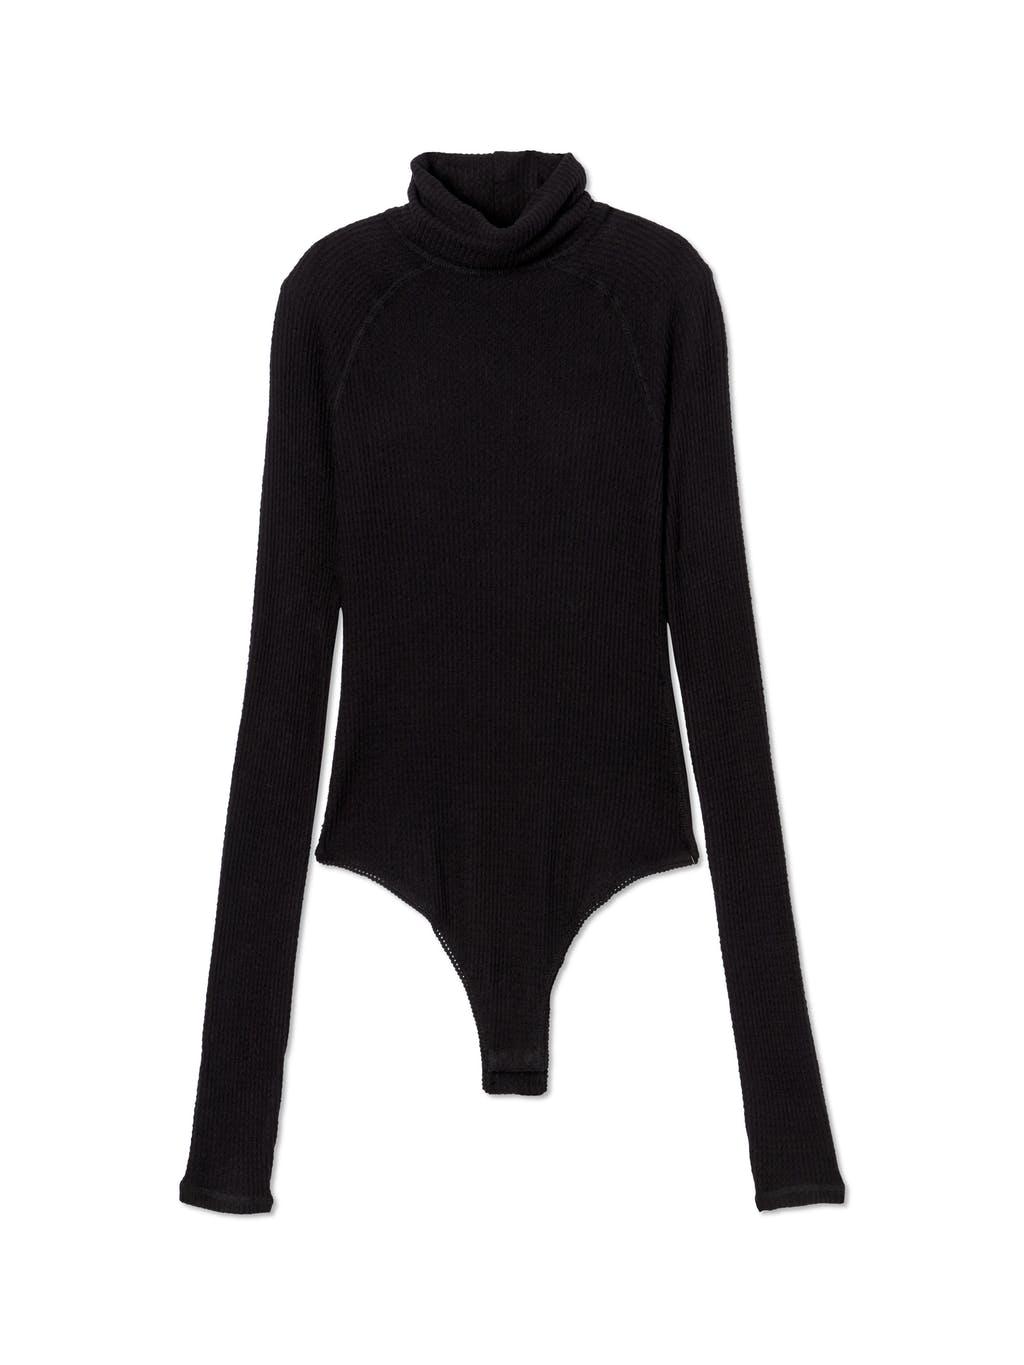 All You Want Thermal Turtleneck Bodysuit